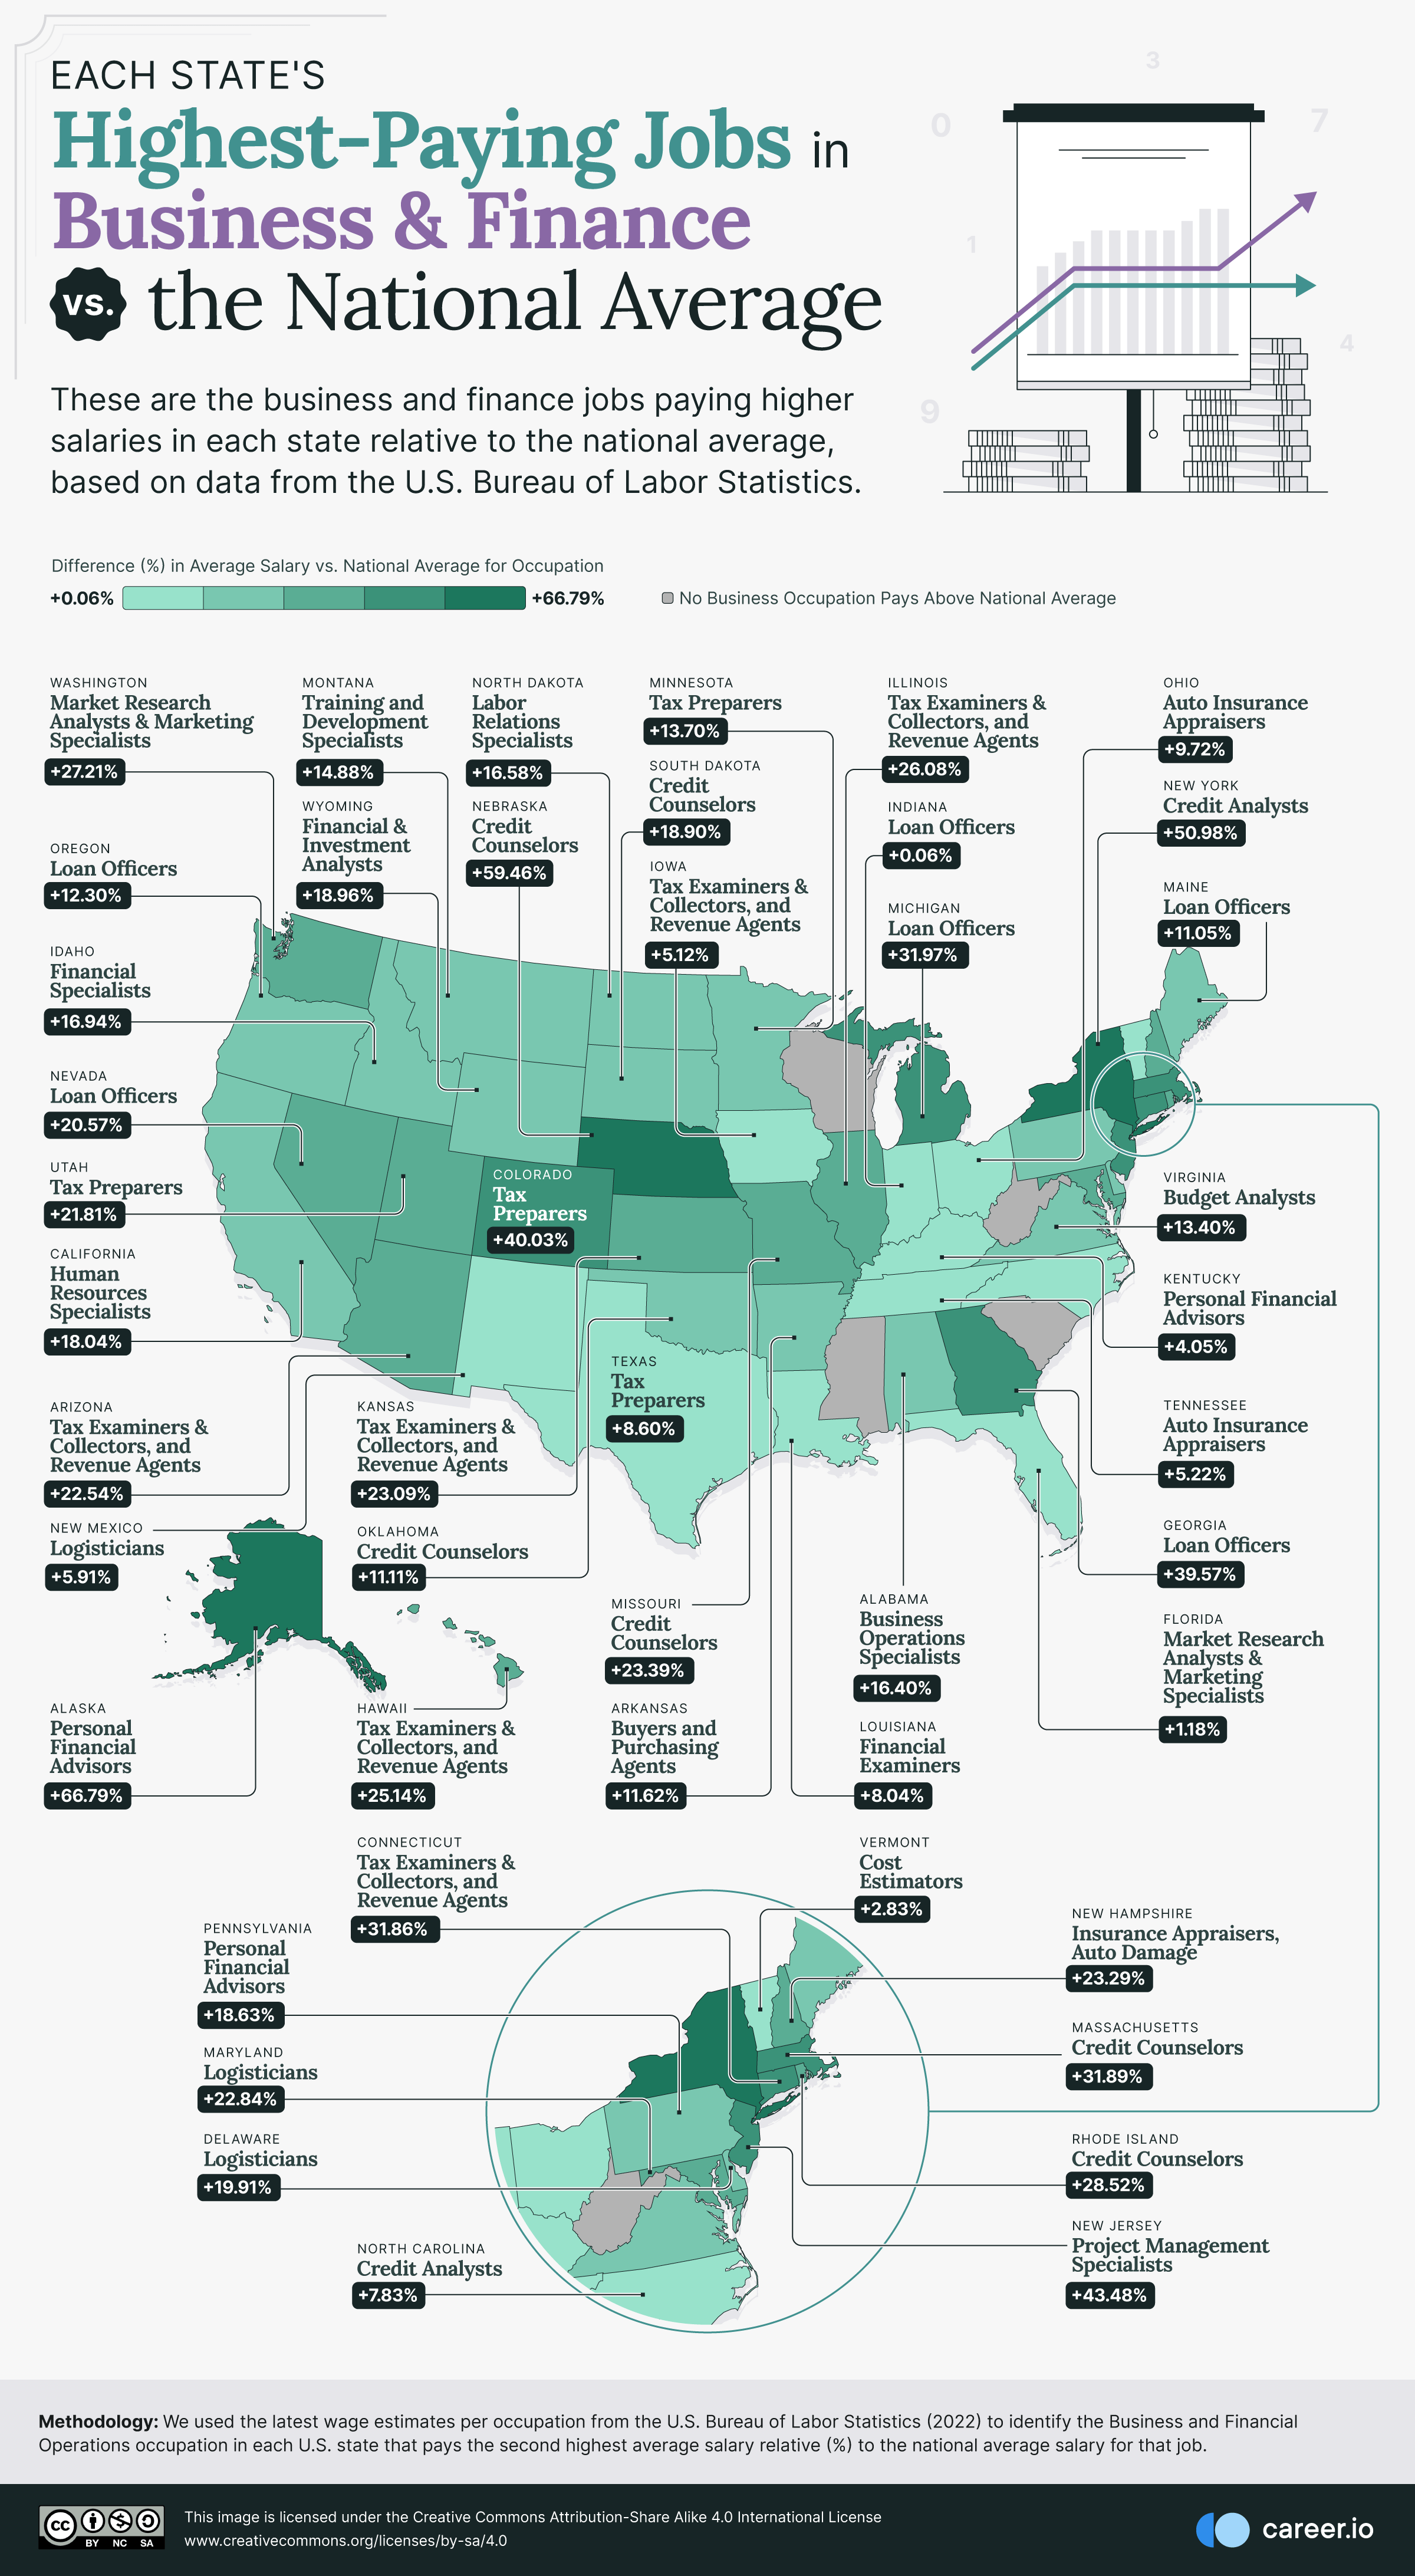 03 Each-States-Highest-Paying-Job-in-Business-Finance-vs-the-National-Average